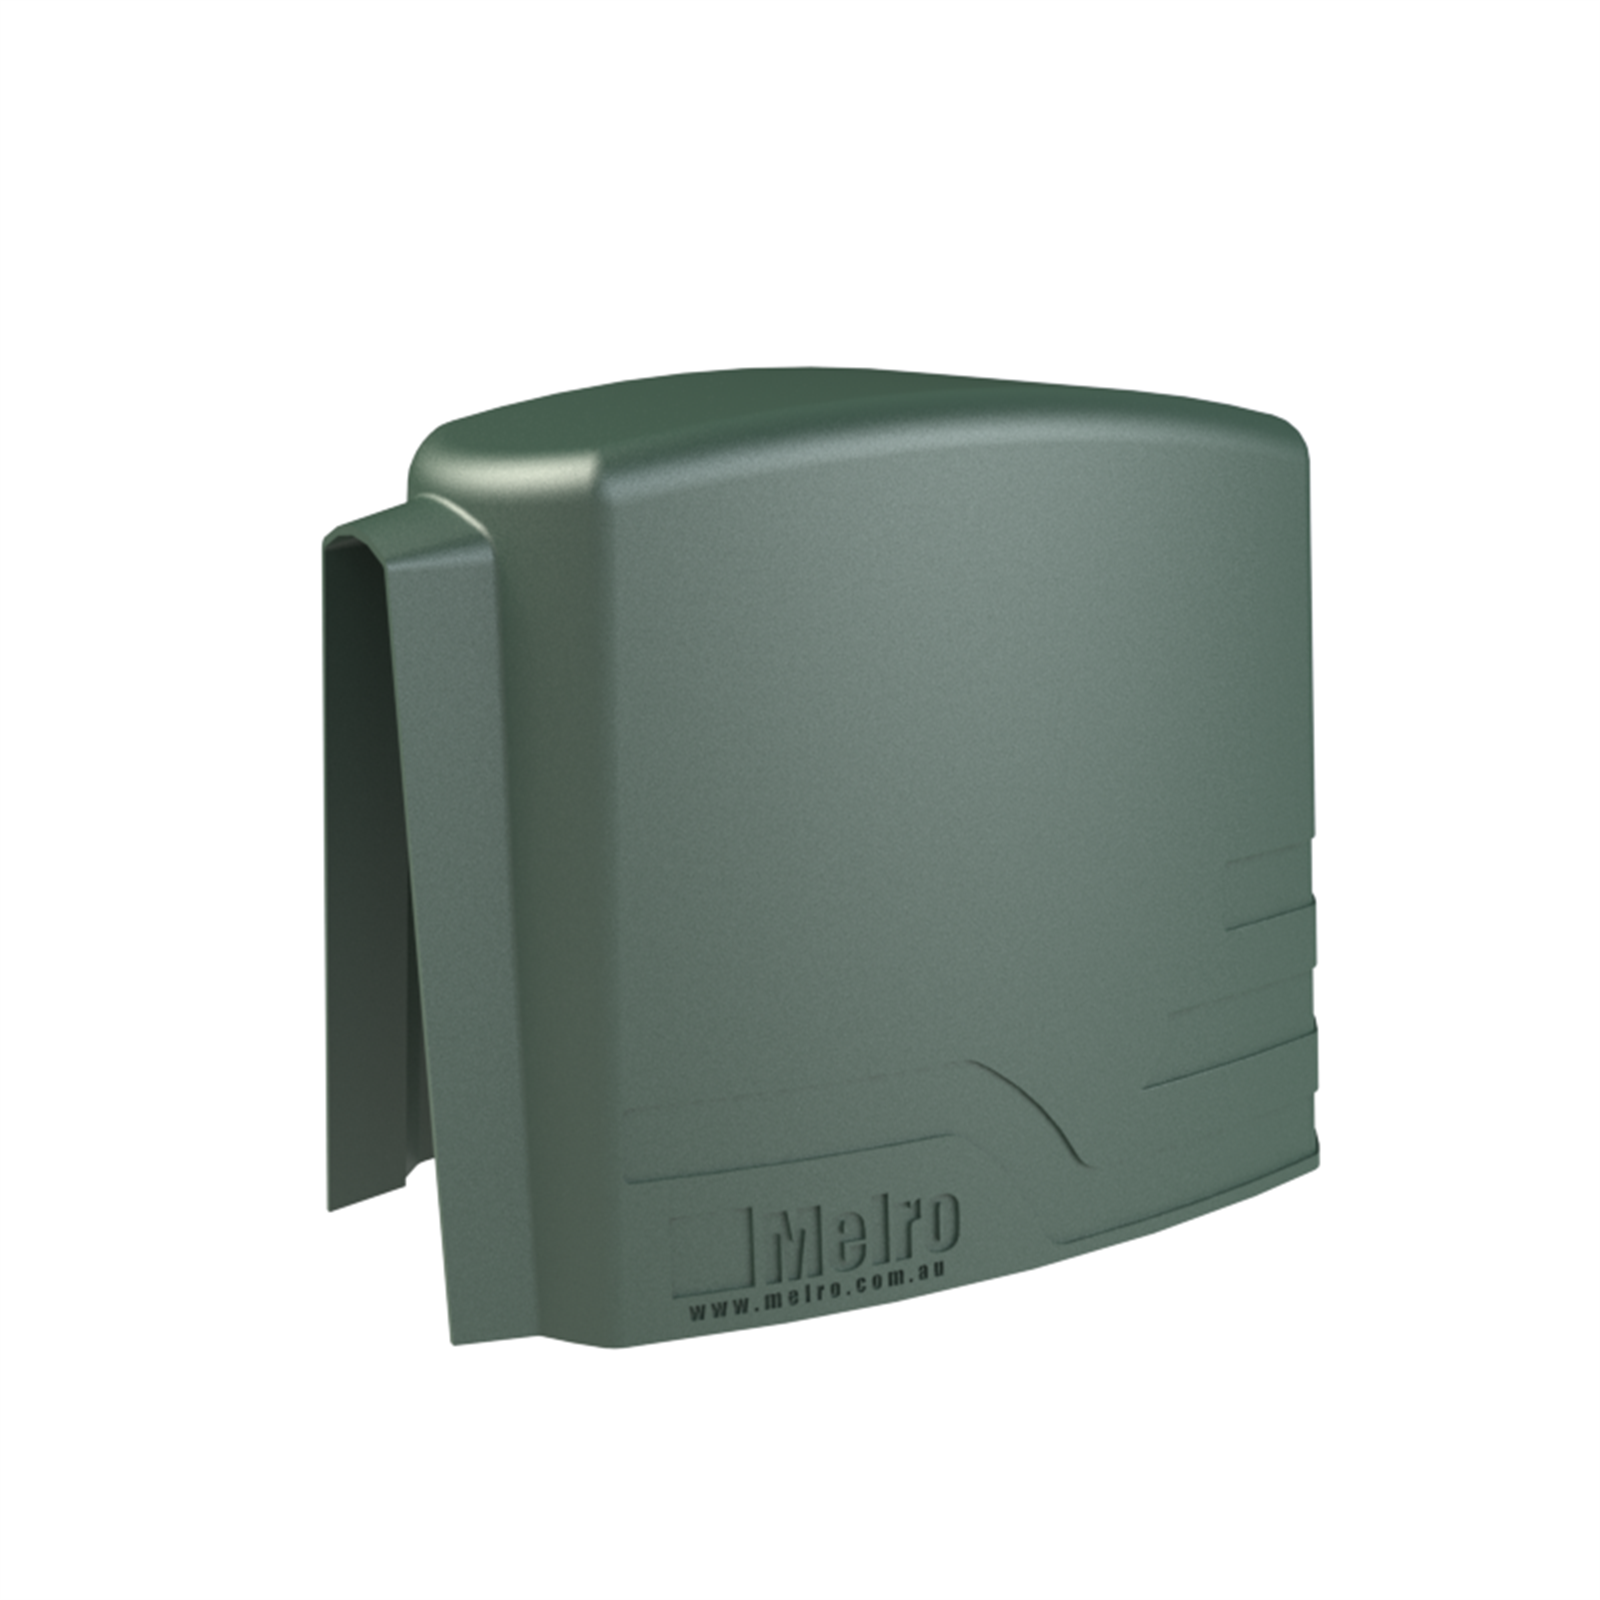 Melro 61 x 48 x 35cm Water Pump Cover - Heritage Green